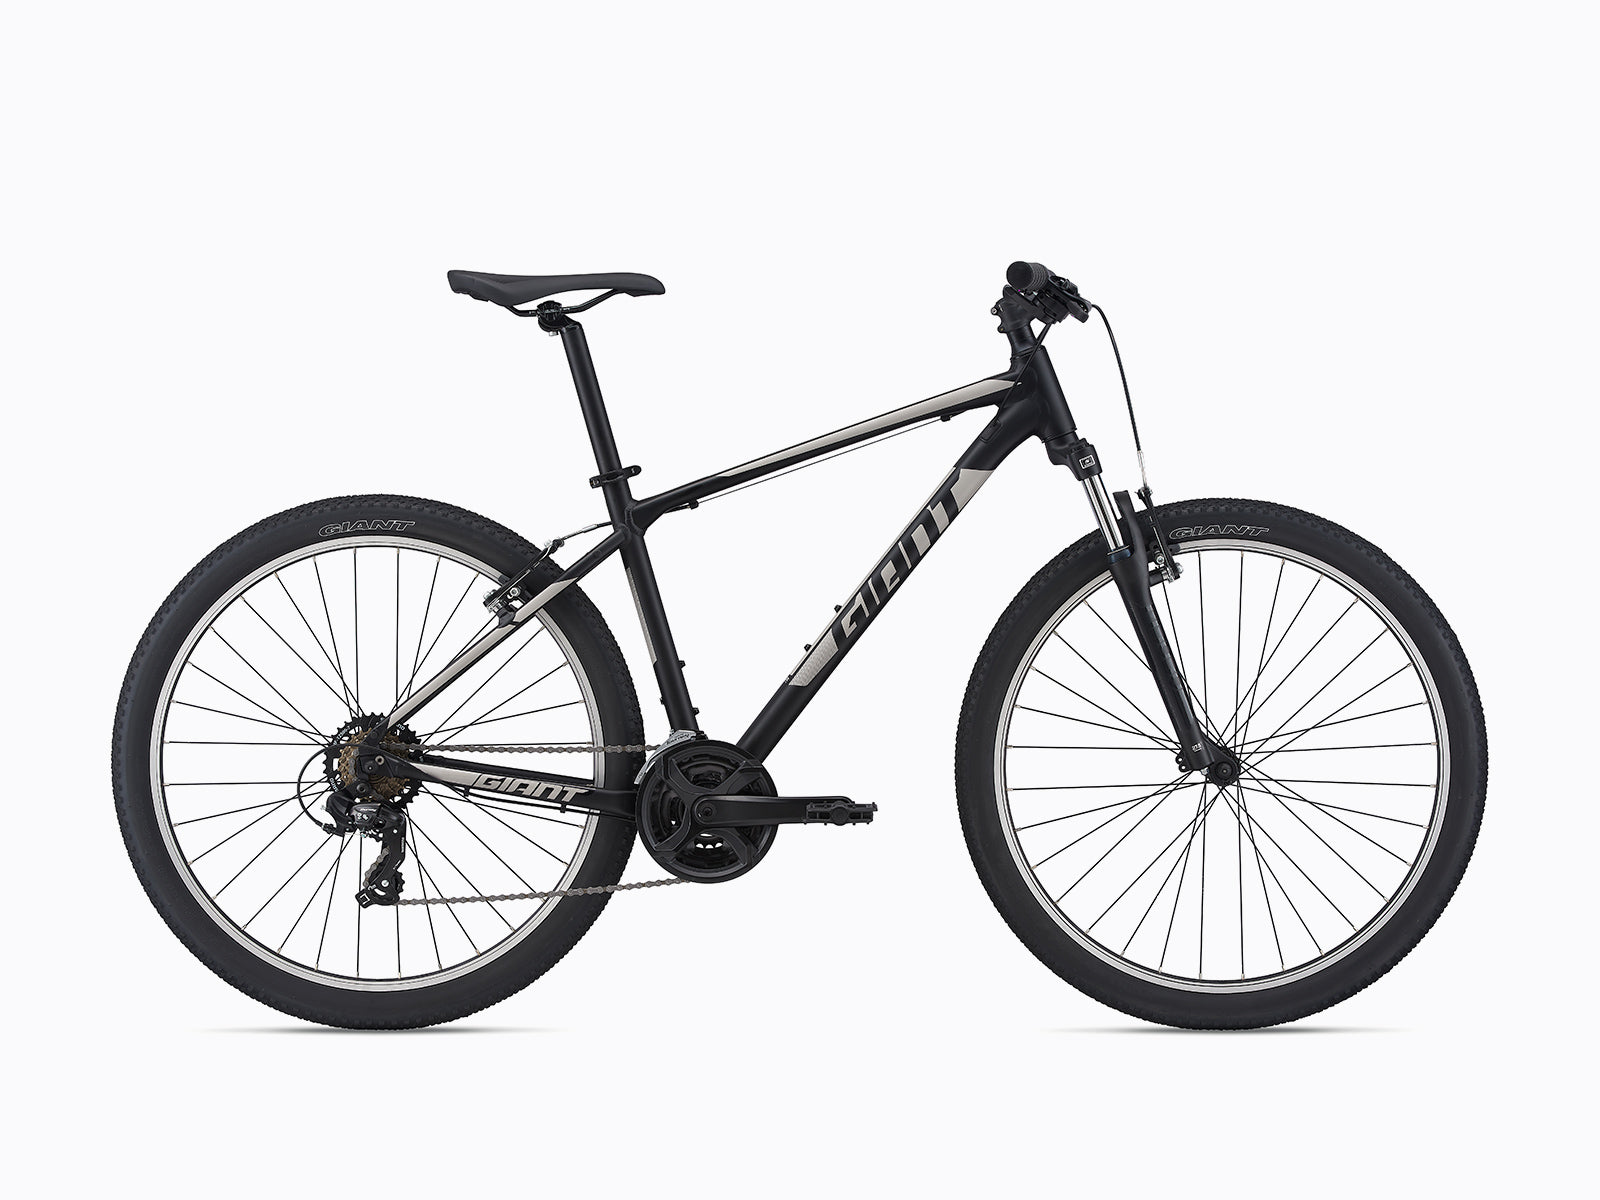 image features a Giant ATX hardtail mountain bike. currently this bike is on sale